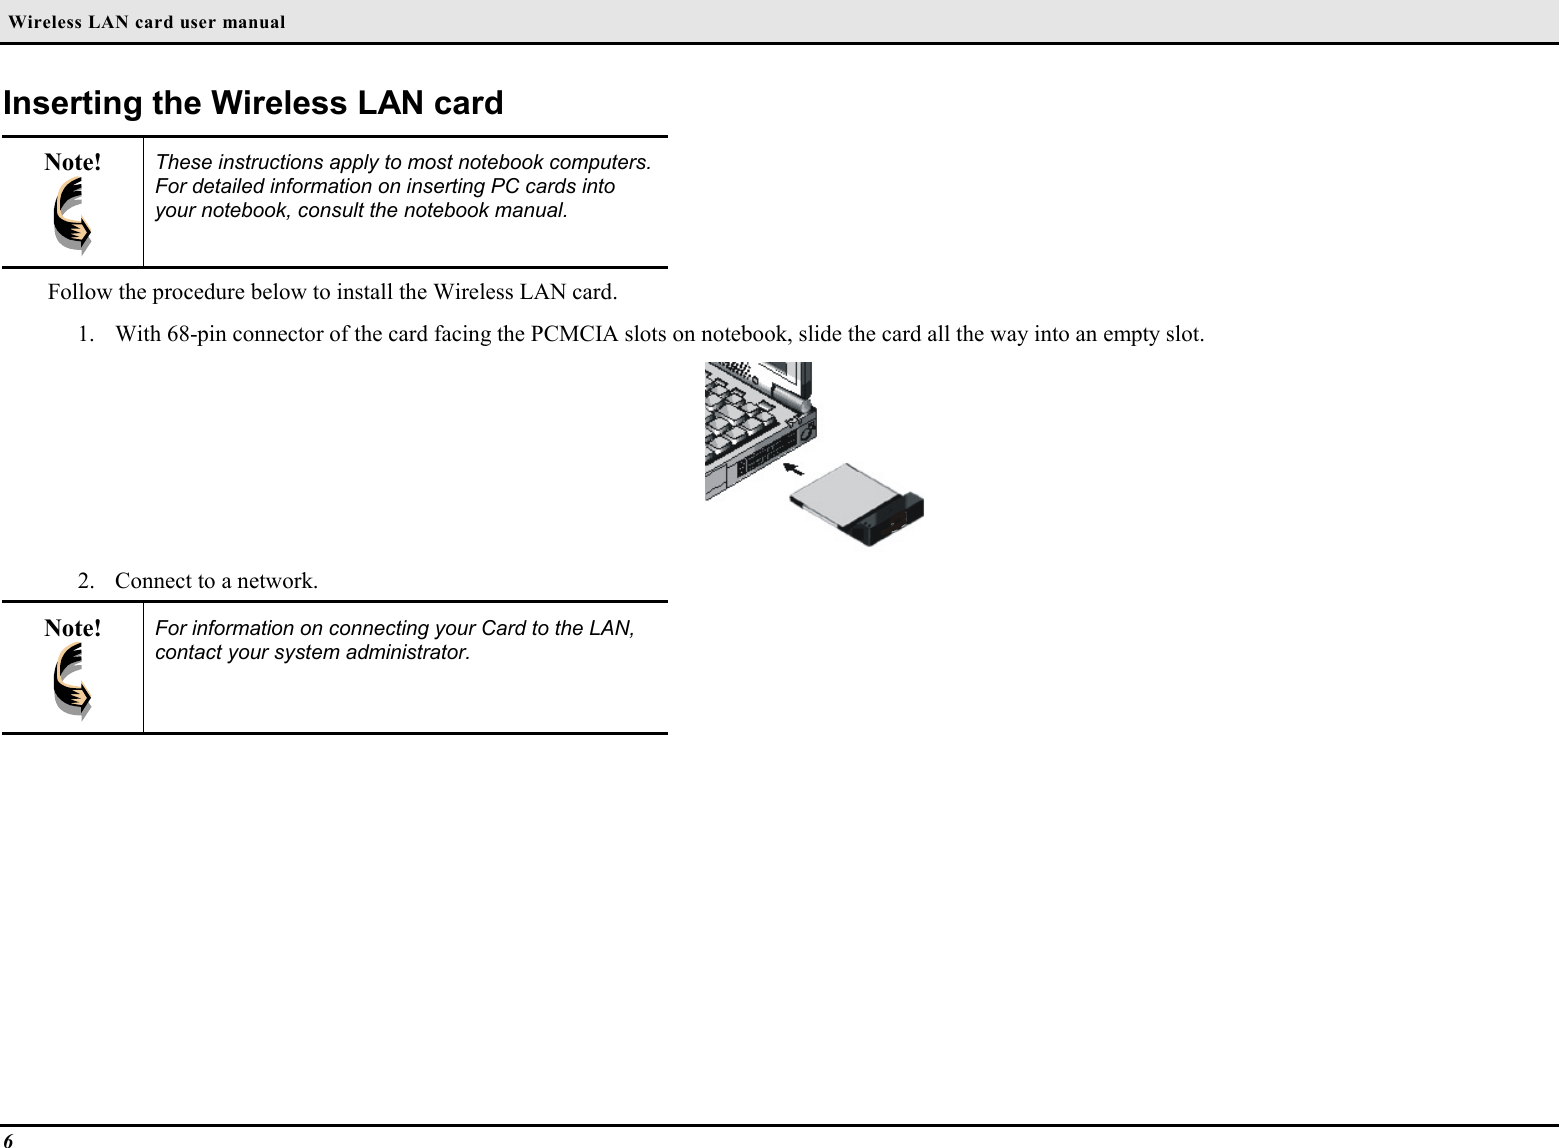  Wireless LAN card user manual6Inserting the Wireless LAN cardNote! These instructions apply to most notebook computers.For detailed information on inserting PC cards intoyour notebook, consult the notebook manual.Follow the procedure below to install the Wireless LAN card.1. With 68-pin connector of the card facing the PCMCIA slots on notebook, slide the card all the way into an empty slot.2. Connect to a network.Note! For information on connecting your Card to the LAN,contact your system administrator.